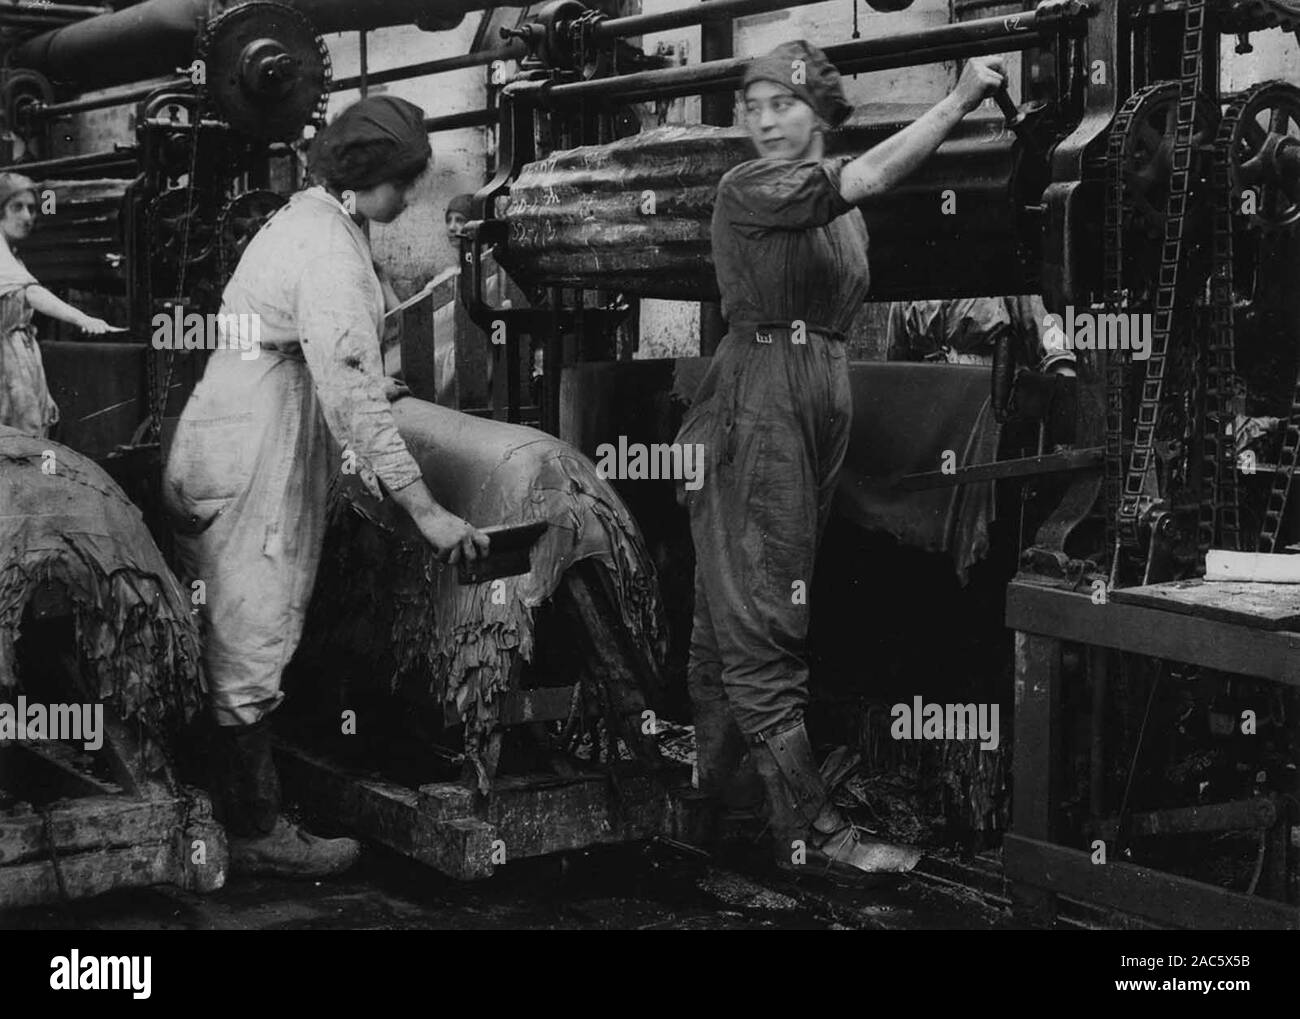 Photograph from the first world war showing  British women working in military industry  from 1914 to 1918 Stock Photo